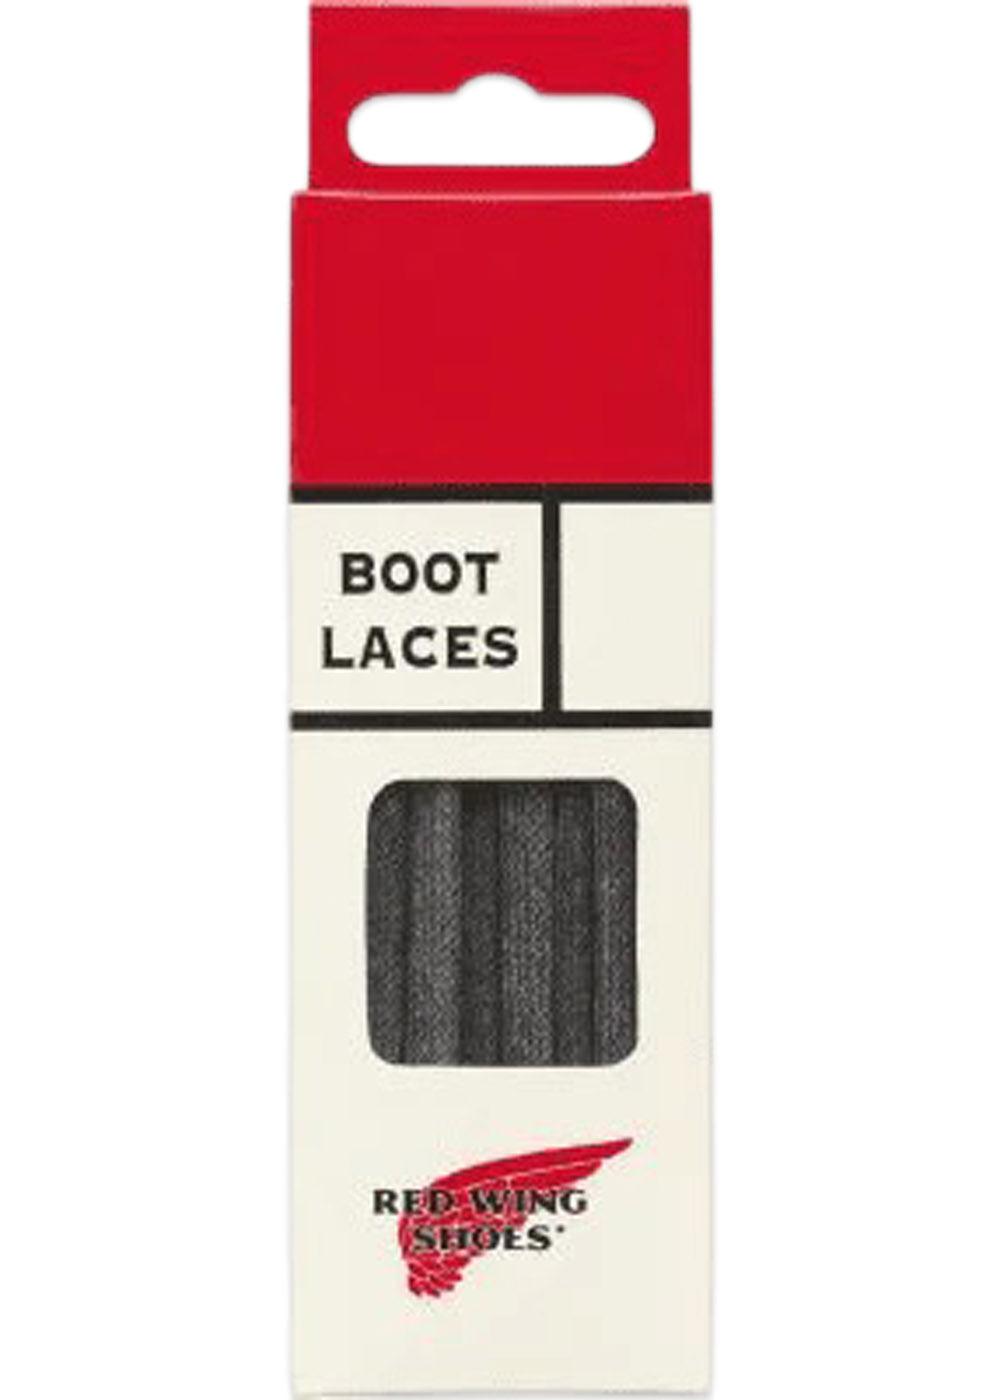 Red Wings Flat Waxes Laces - Black. Køb accessories her.